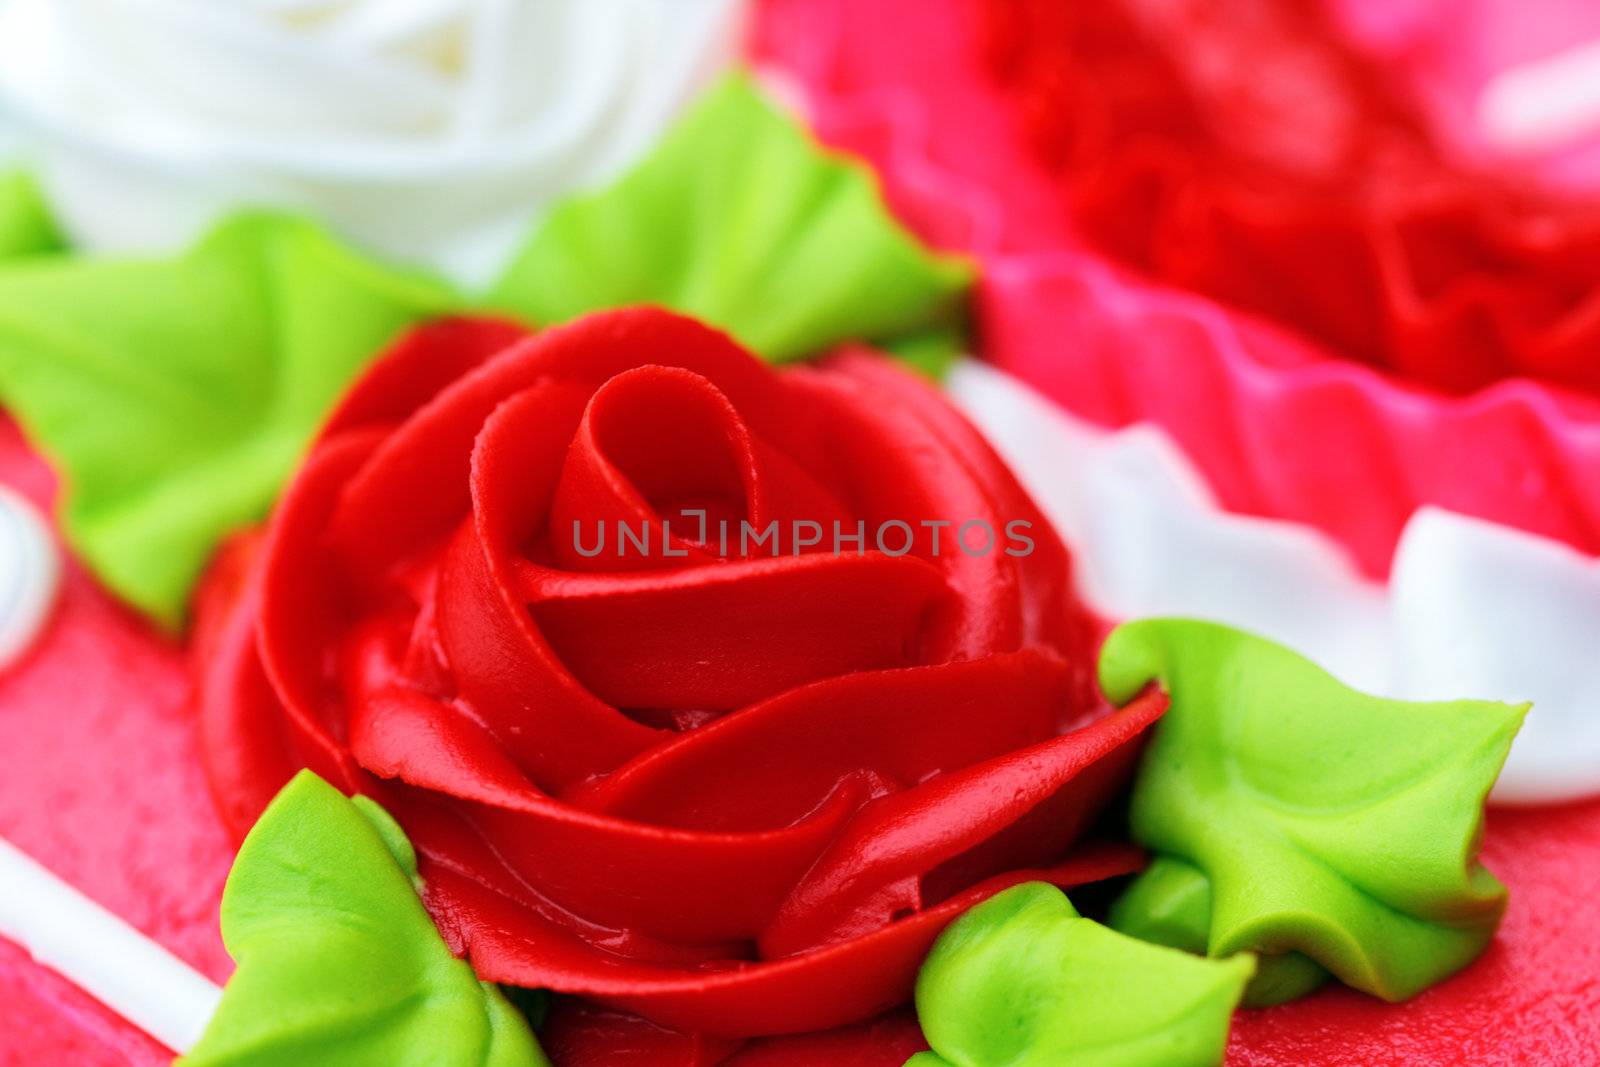 Up-close rose shaped cake icing for birthday, anniversary or Valentine's Day.